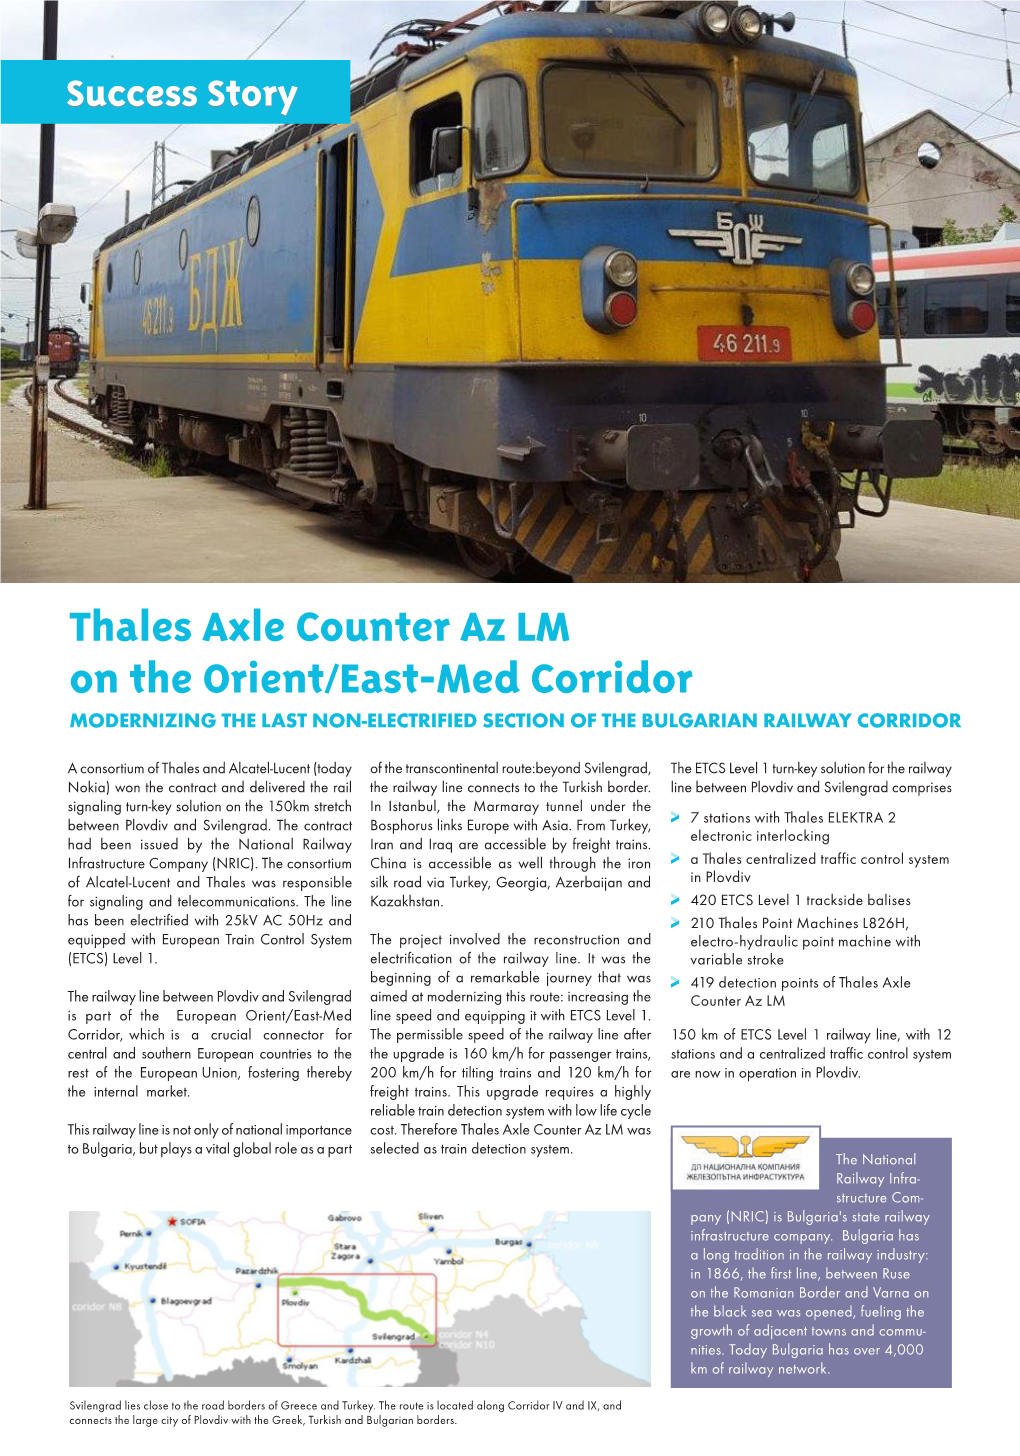 Thales Axle Counter Az LM on the Orient/East-Med Corridor MODERNIZING the LAST NON-ELECTRIFIED SECTION of the BULGARIAN RAILWAY CORRIDOR